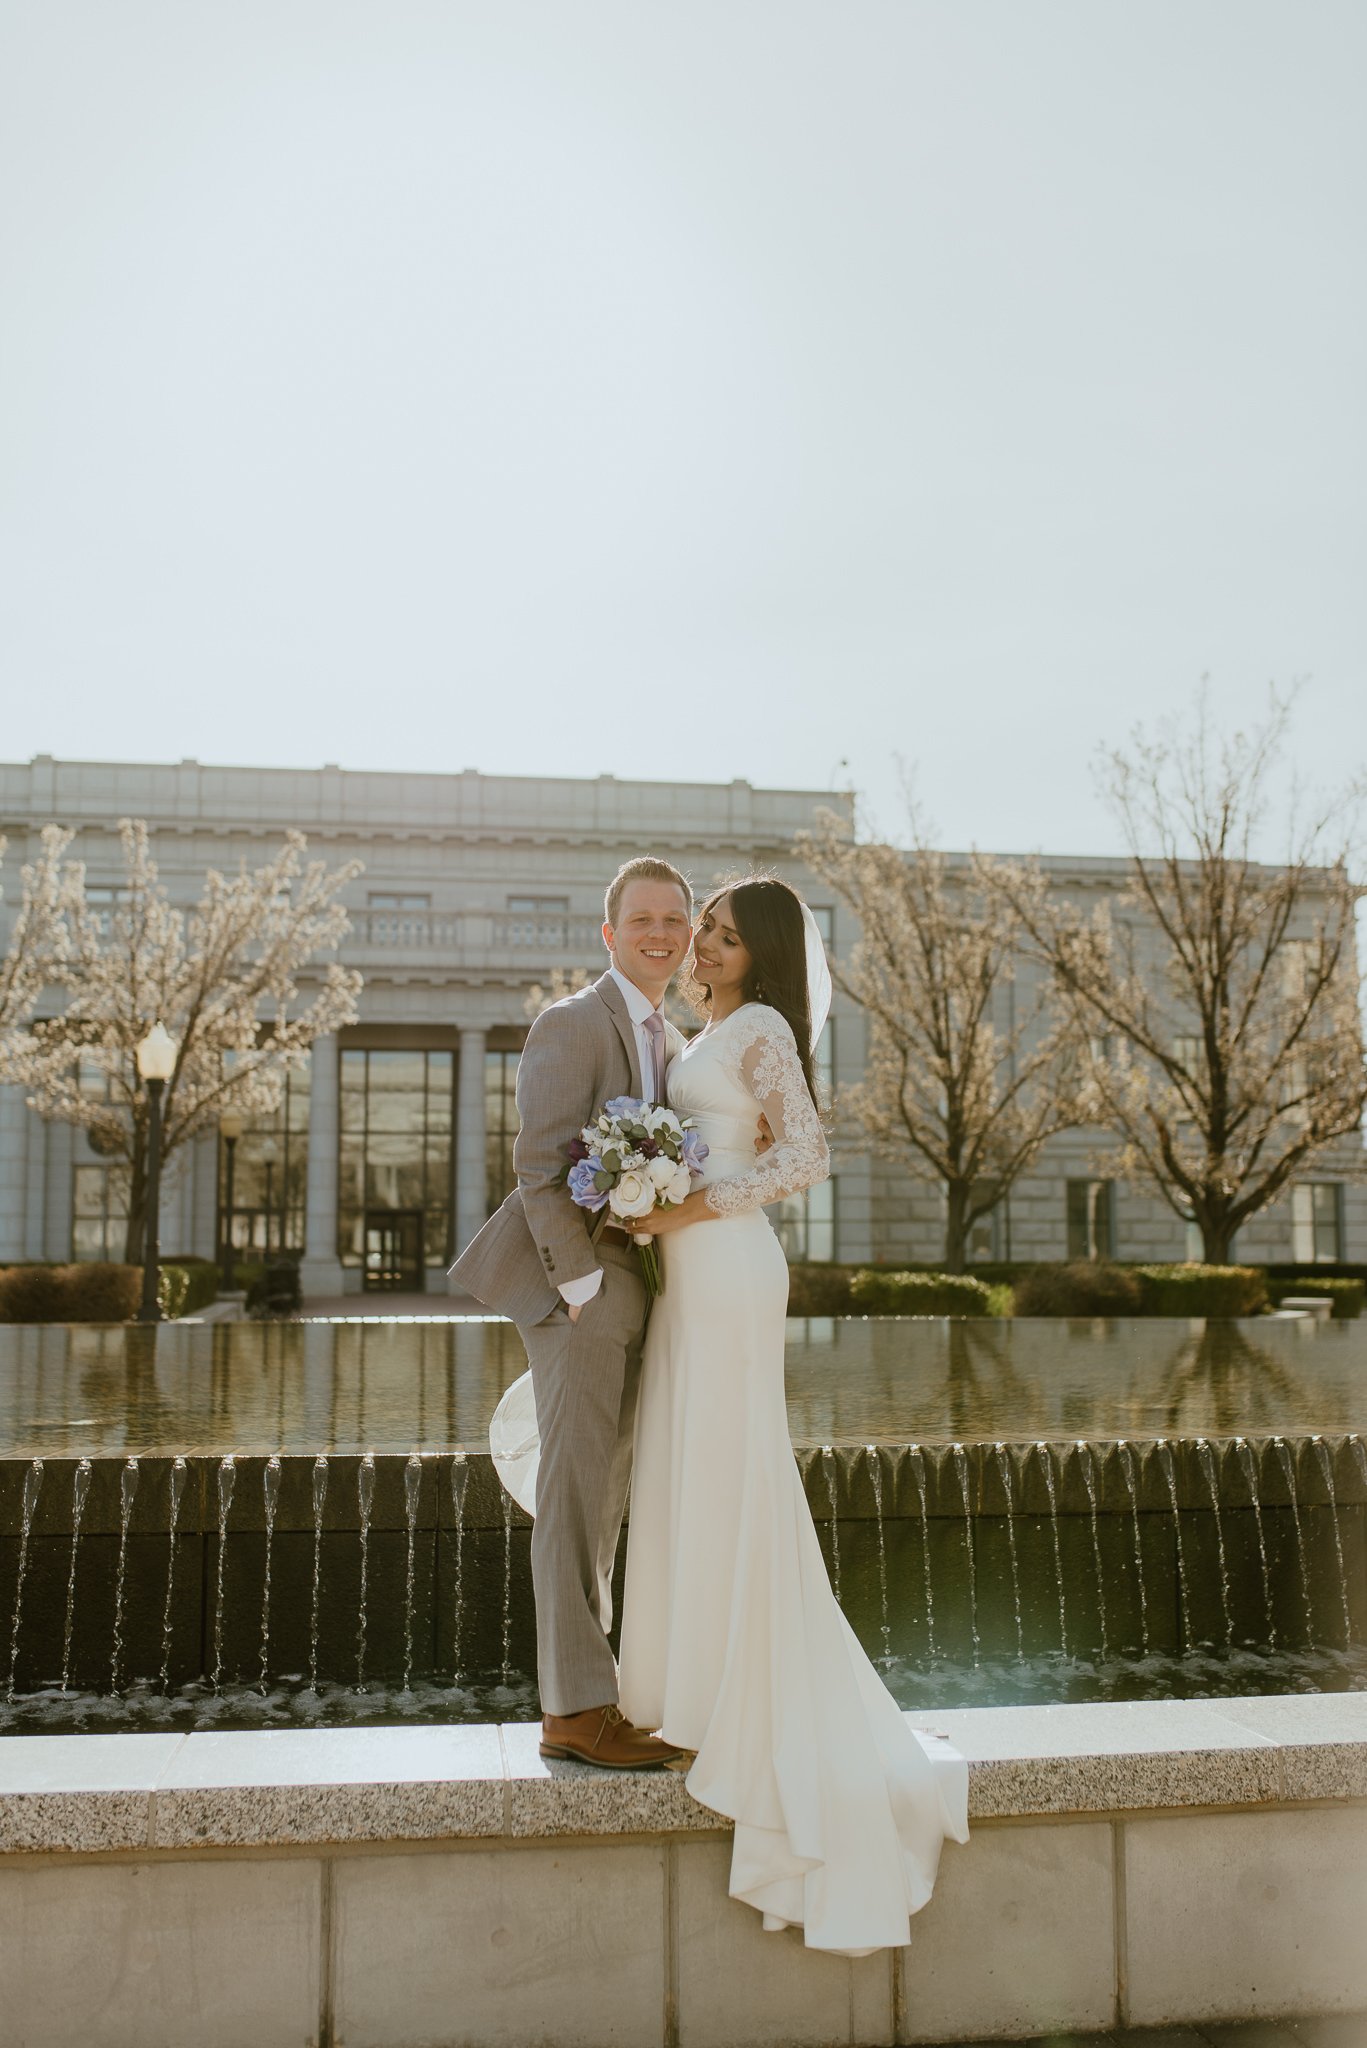 Utah-State-Capitol-Spring-Blossons-Bountiful-LDS-Wedding-Hopesandcheers-photo-17